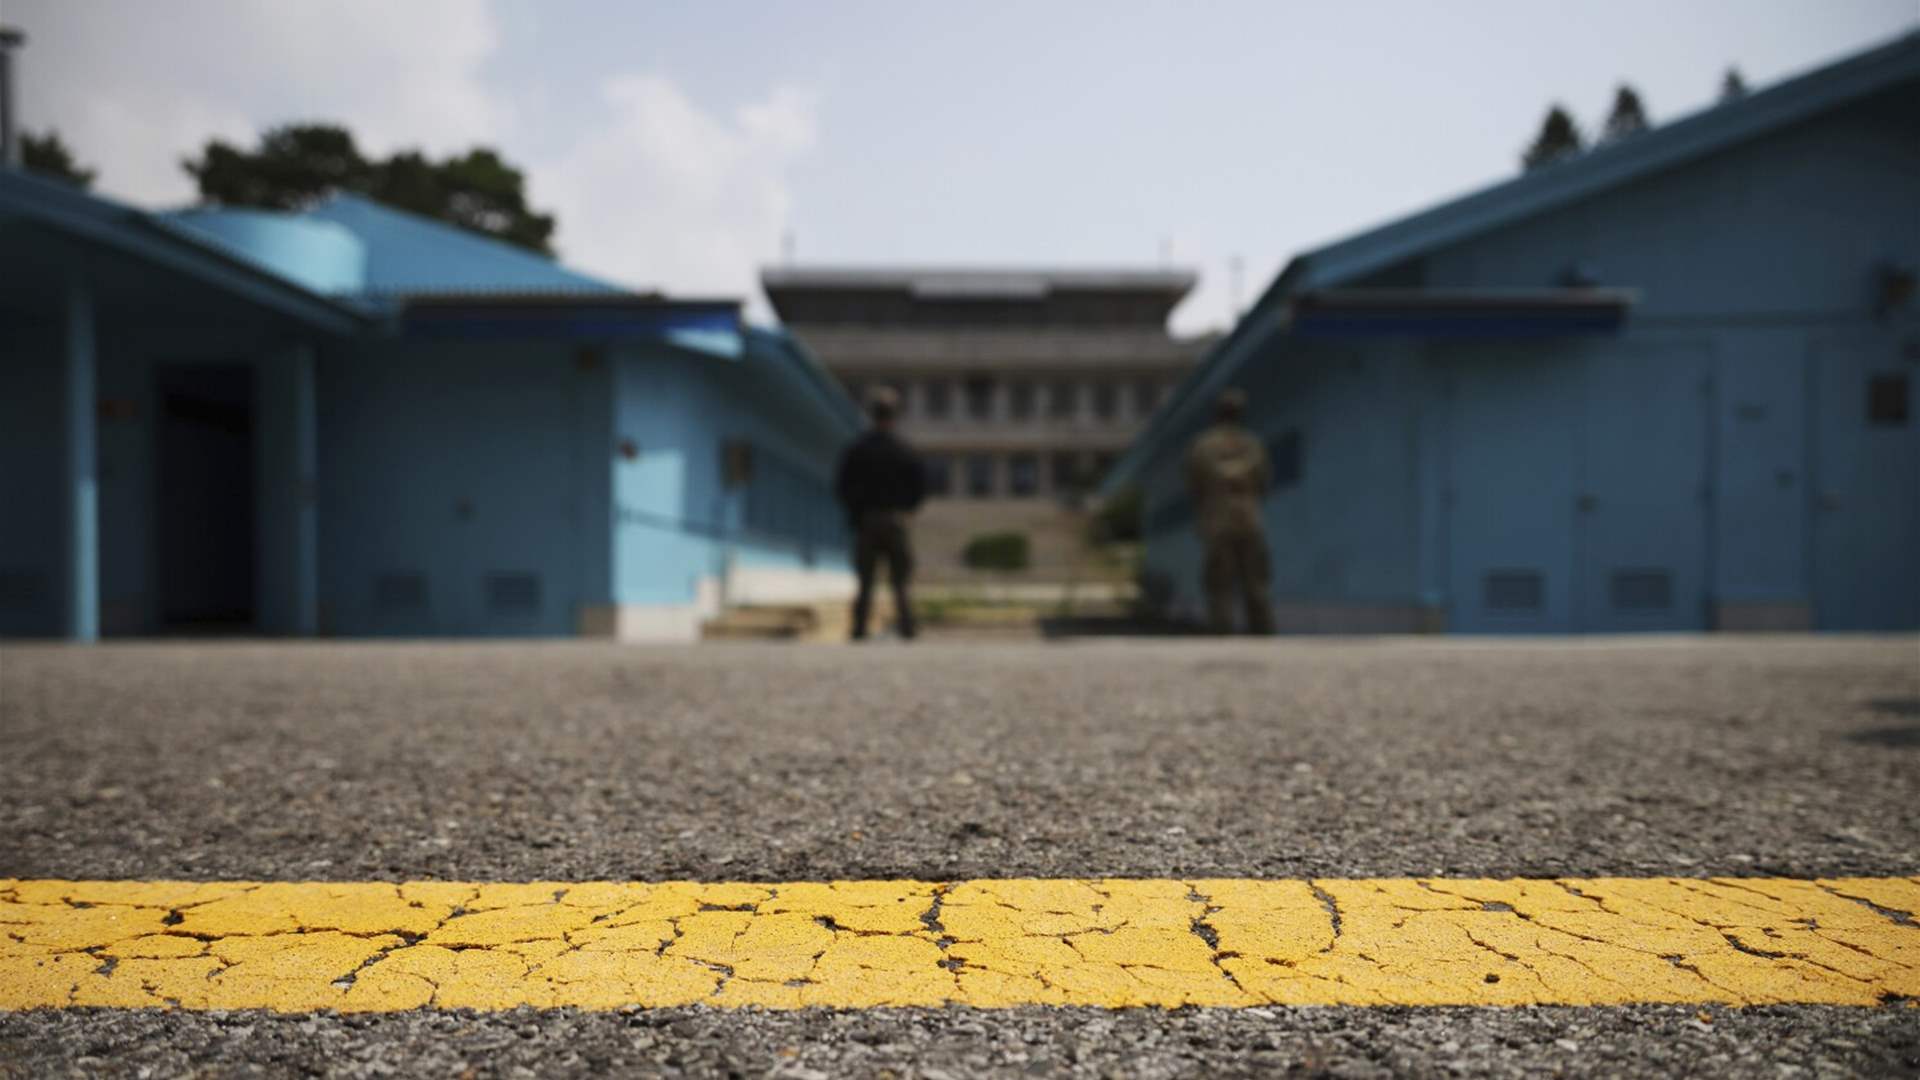 An American citizen crossed into North Korea during a border tour: United Nations